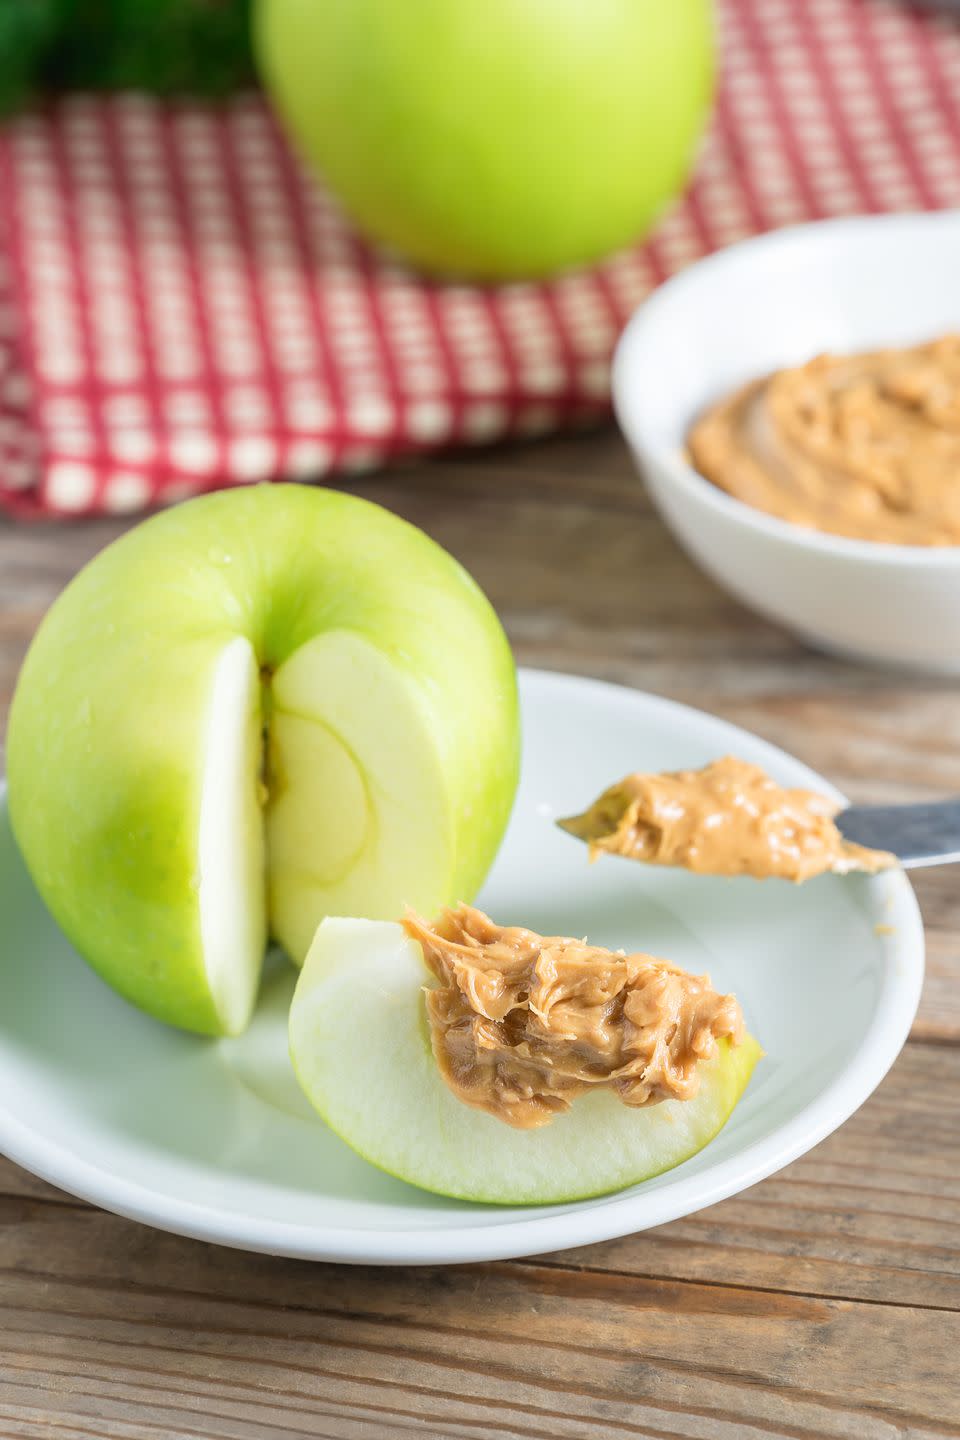 28) Granny Smith Apple With Peanut Butter